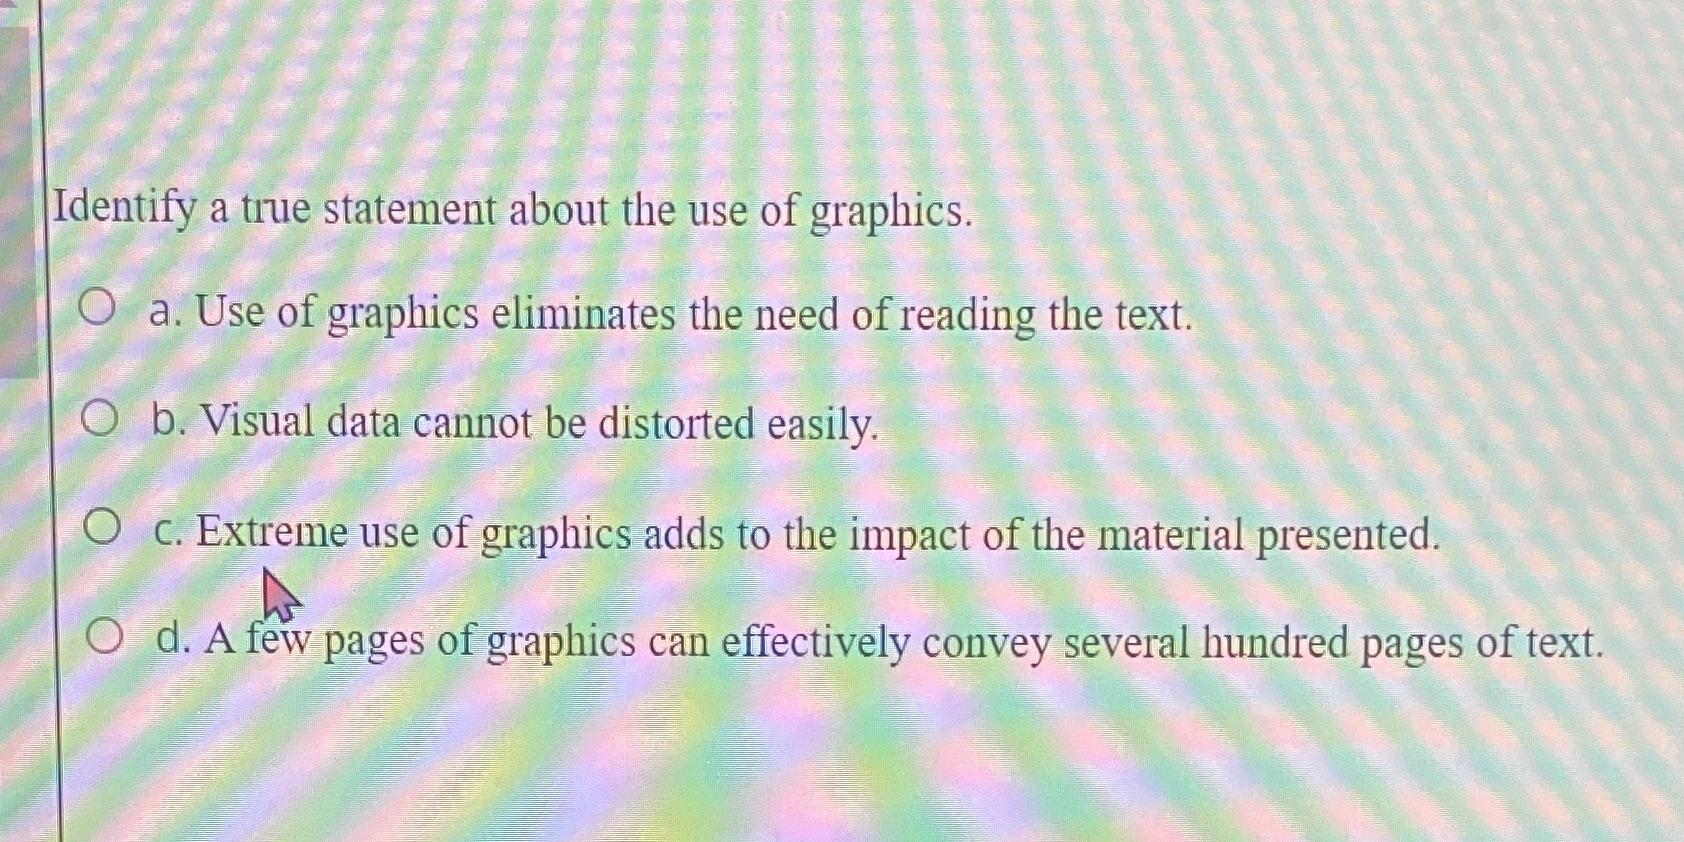 Identify a true statement about the use of graphics. Oa. Use of graphics eliminates the need of reading the